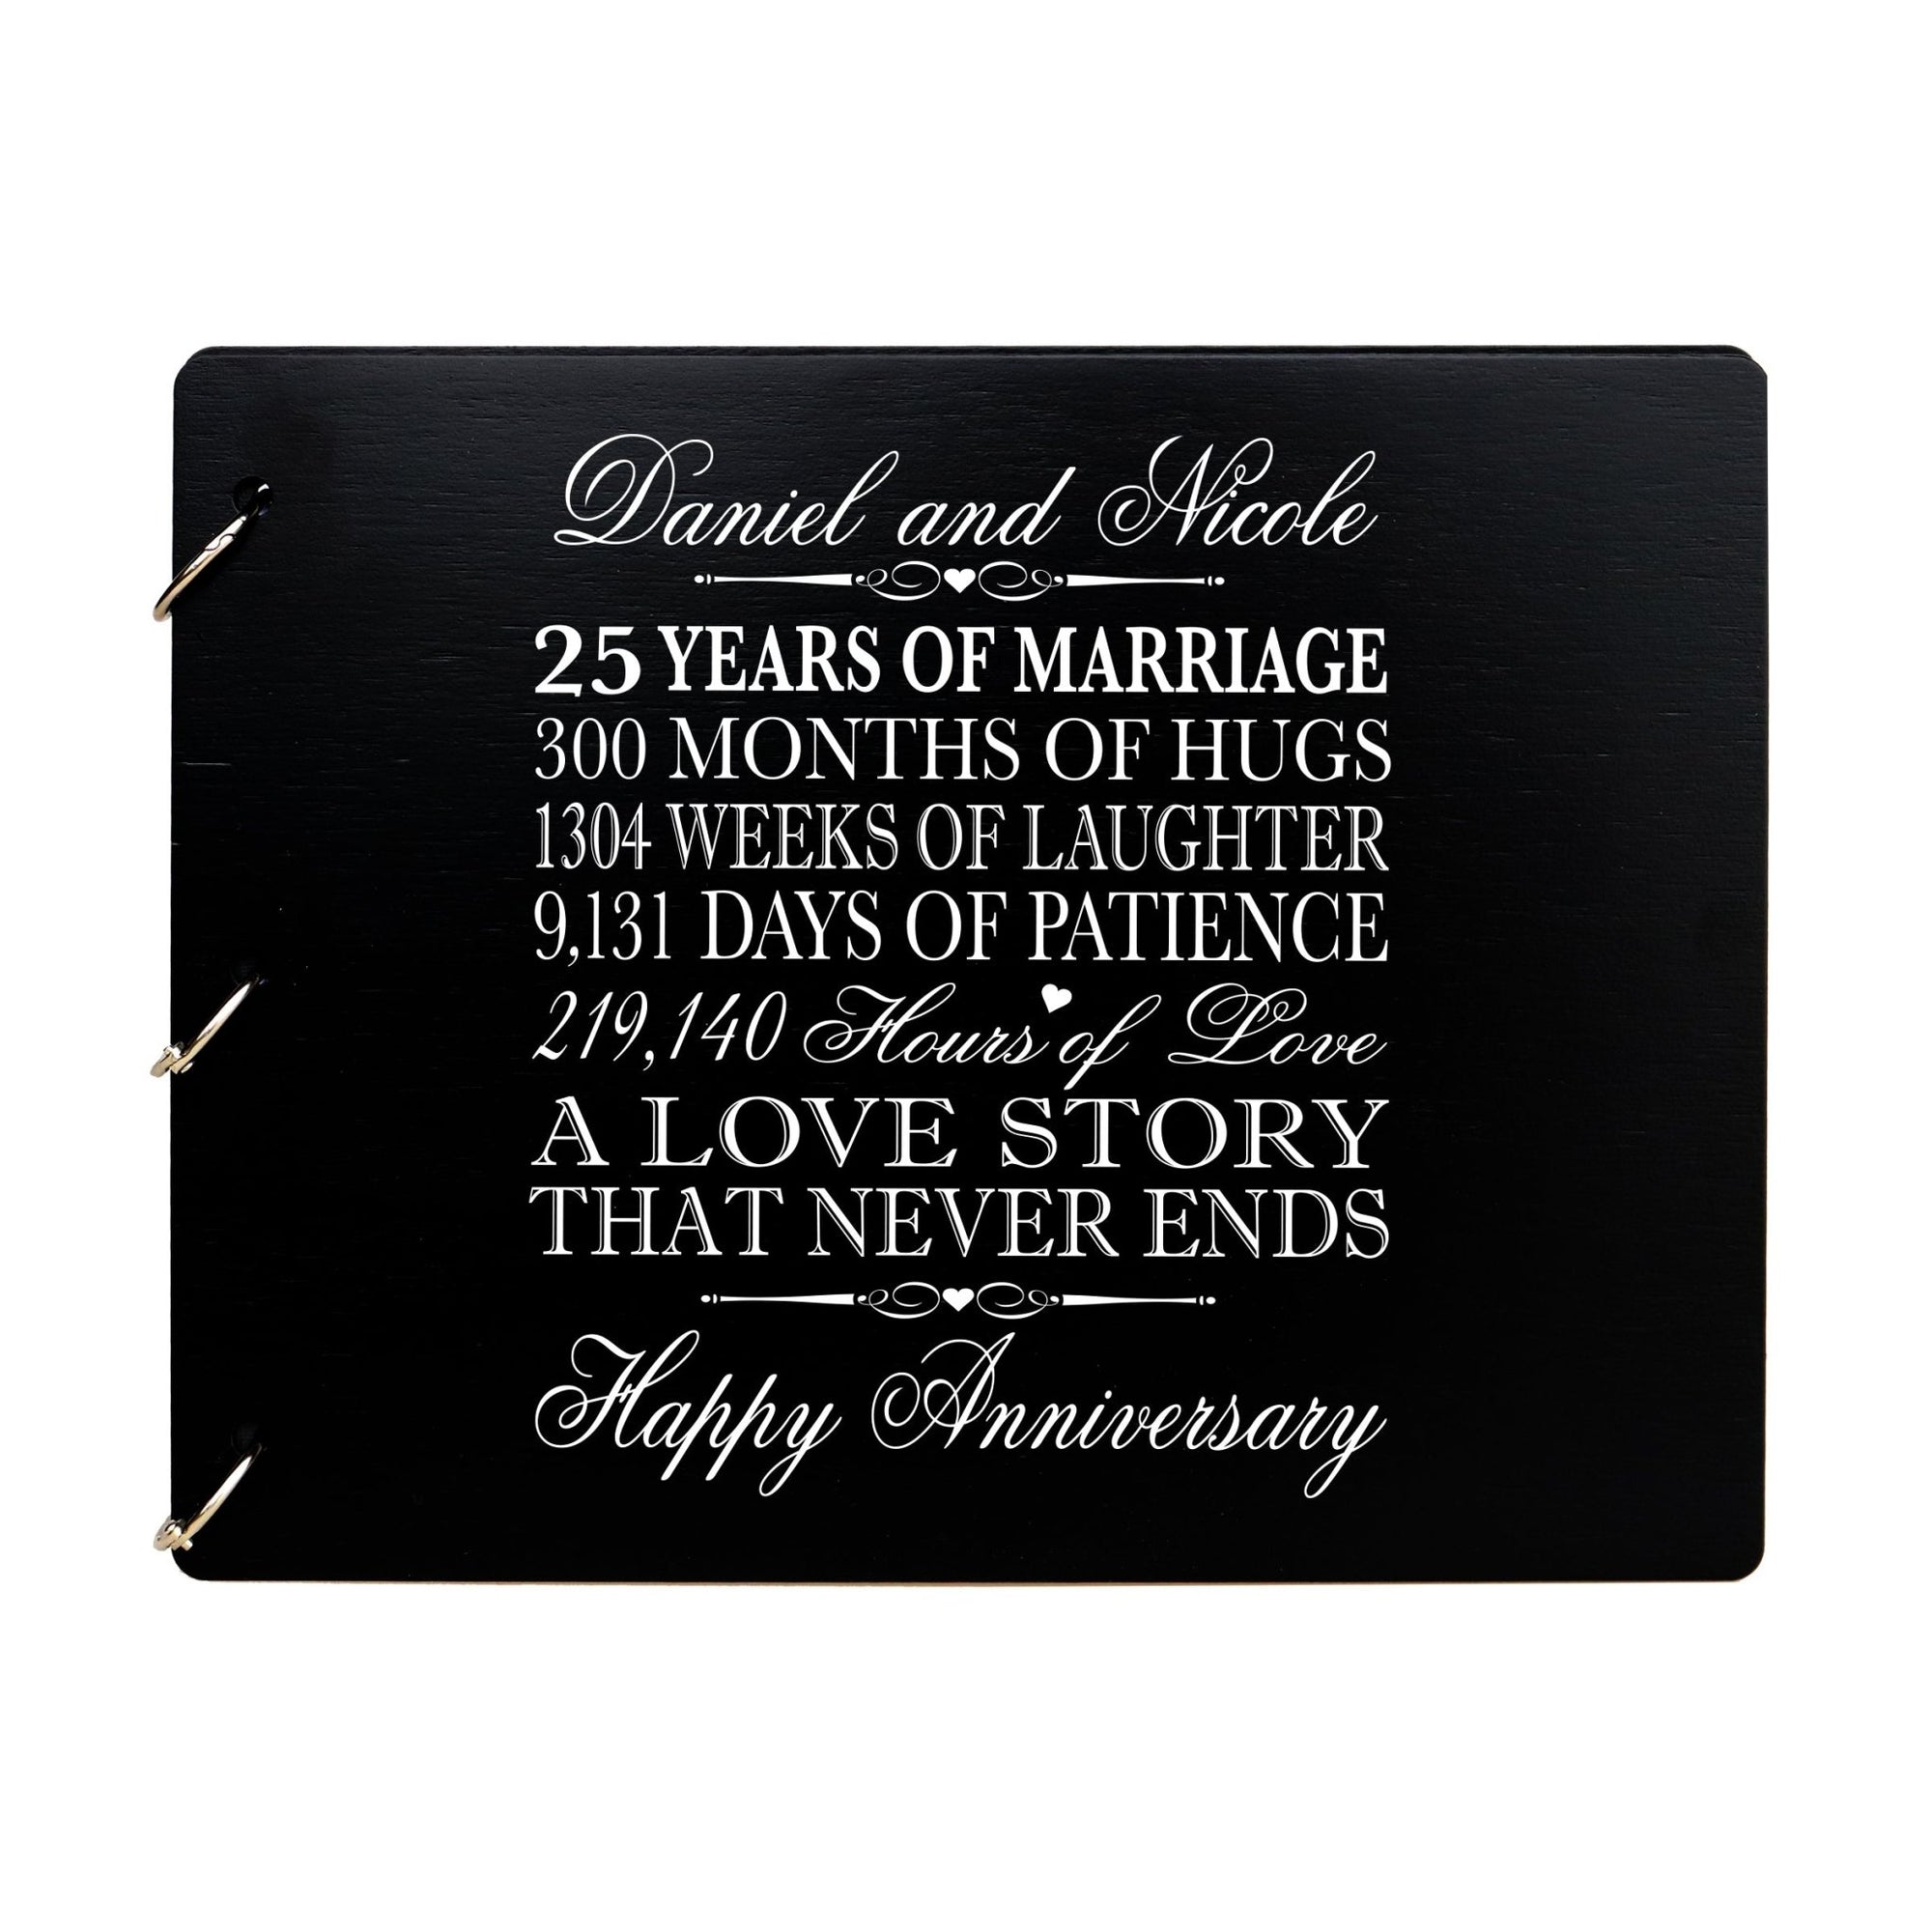 Personalized Guest Book Sign for 25th Wedding Anniversary - A Love Story - LifeSong Milestones